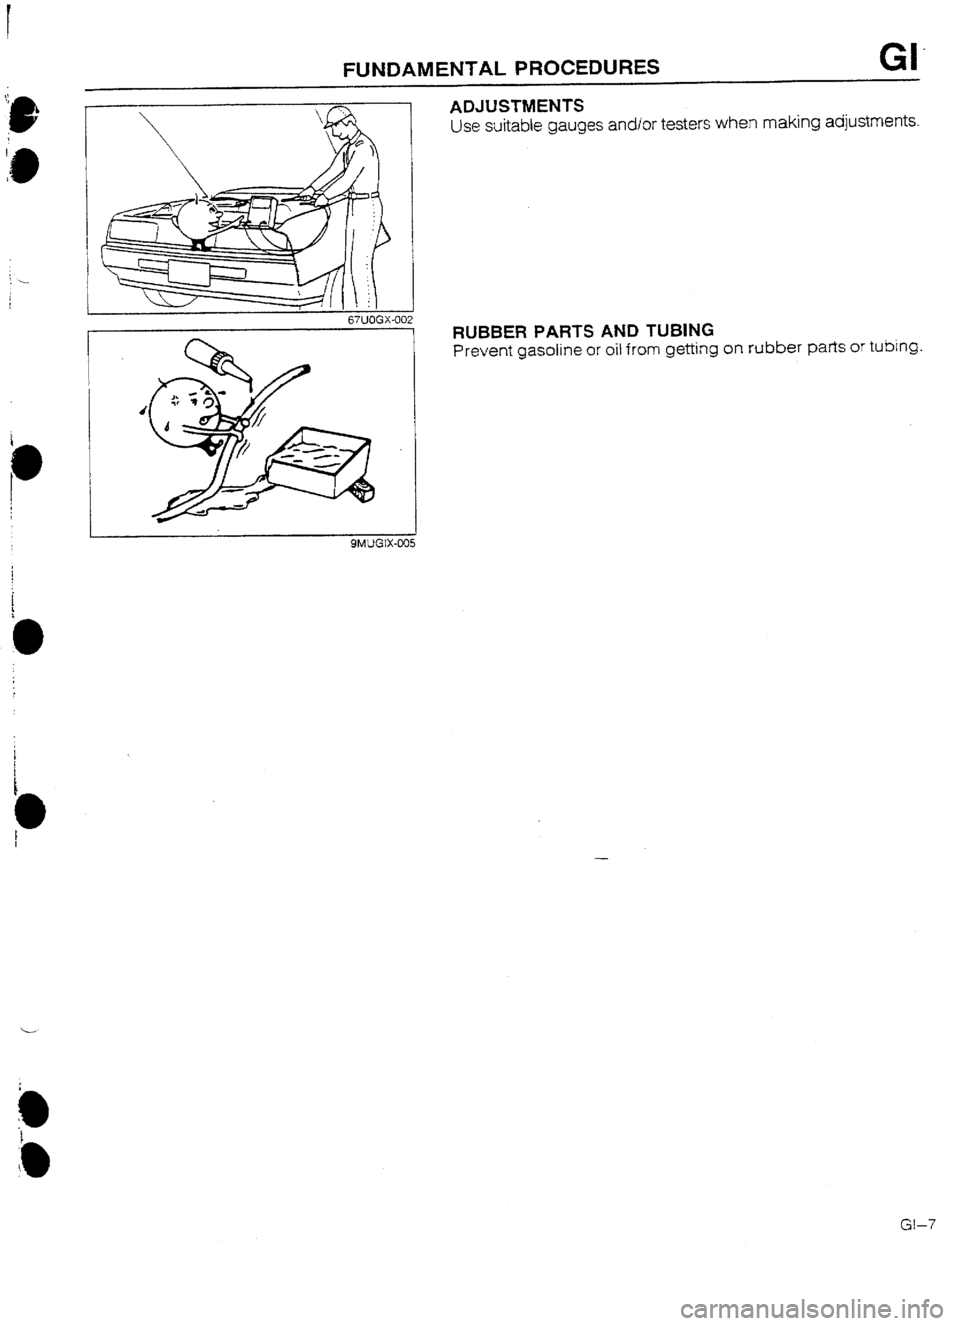 MAZDA 232 1990  Workshop Manual Suplement FUNDAMENTAL PROCEDURES GI’ 
I 
ADJUSTMENTS 
Use suitable gauges and/or testers when making adjustments. 
I 67UOGX-002 RUBBER PARTS AND TUBING 
Prevent gasoline or oil from getting on rubber parts or